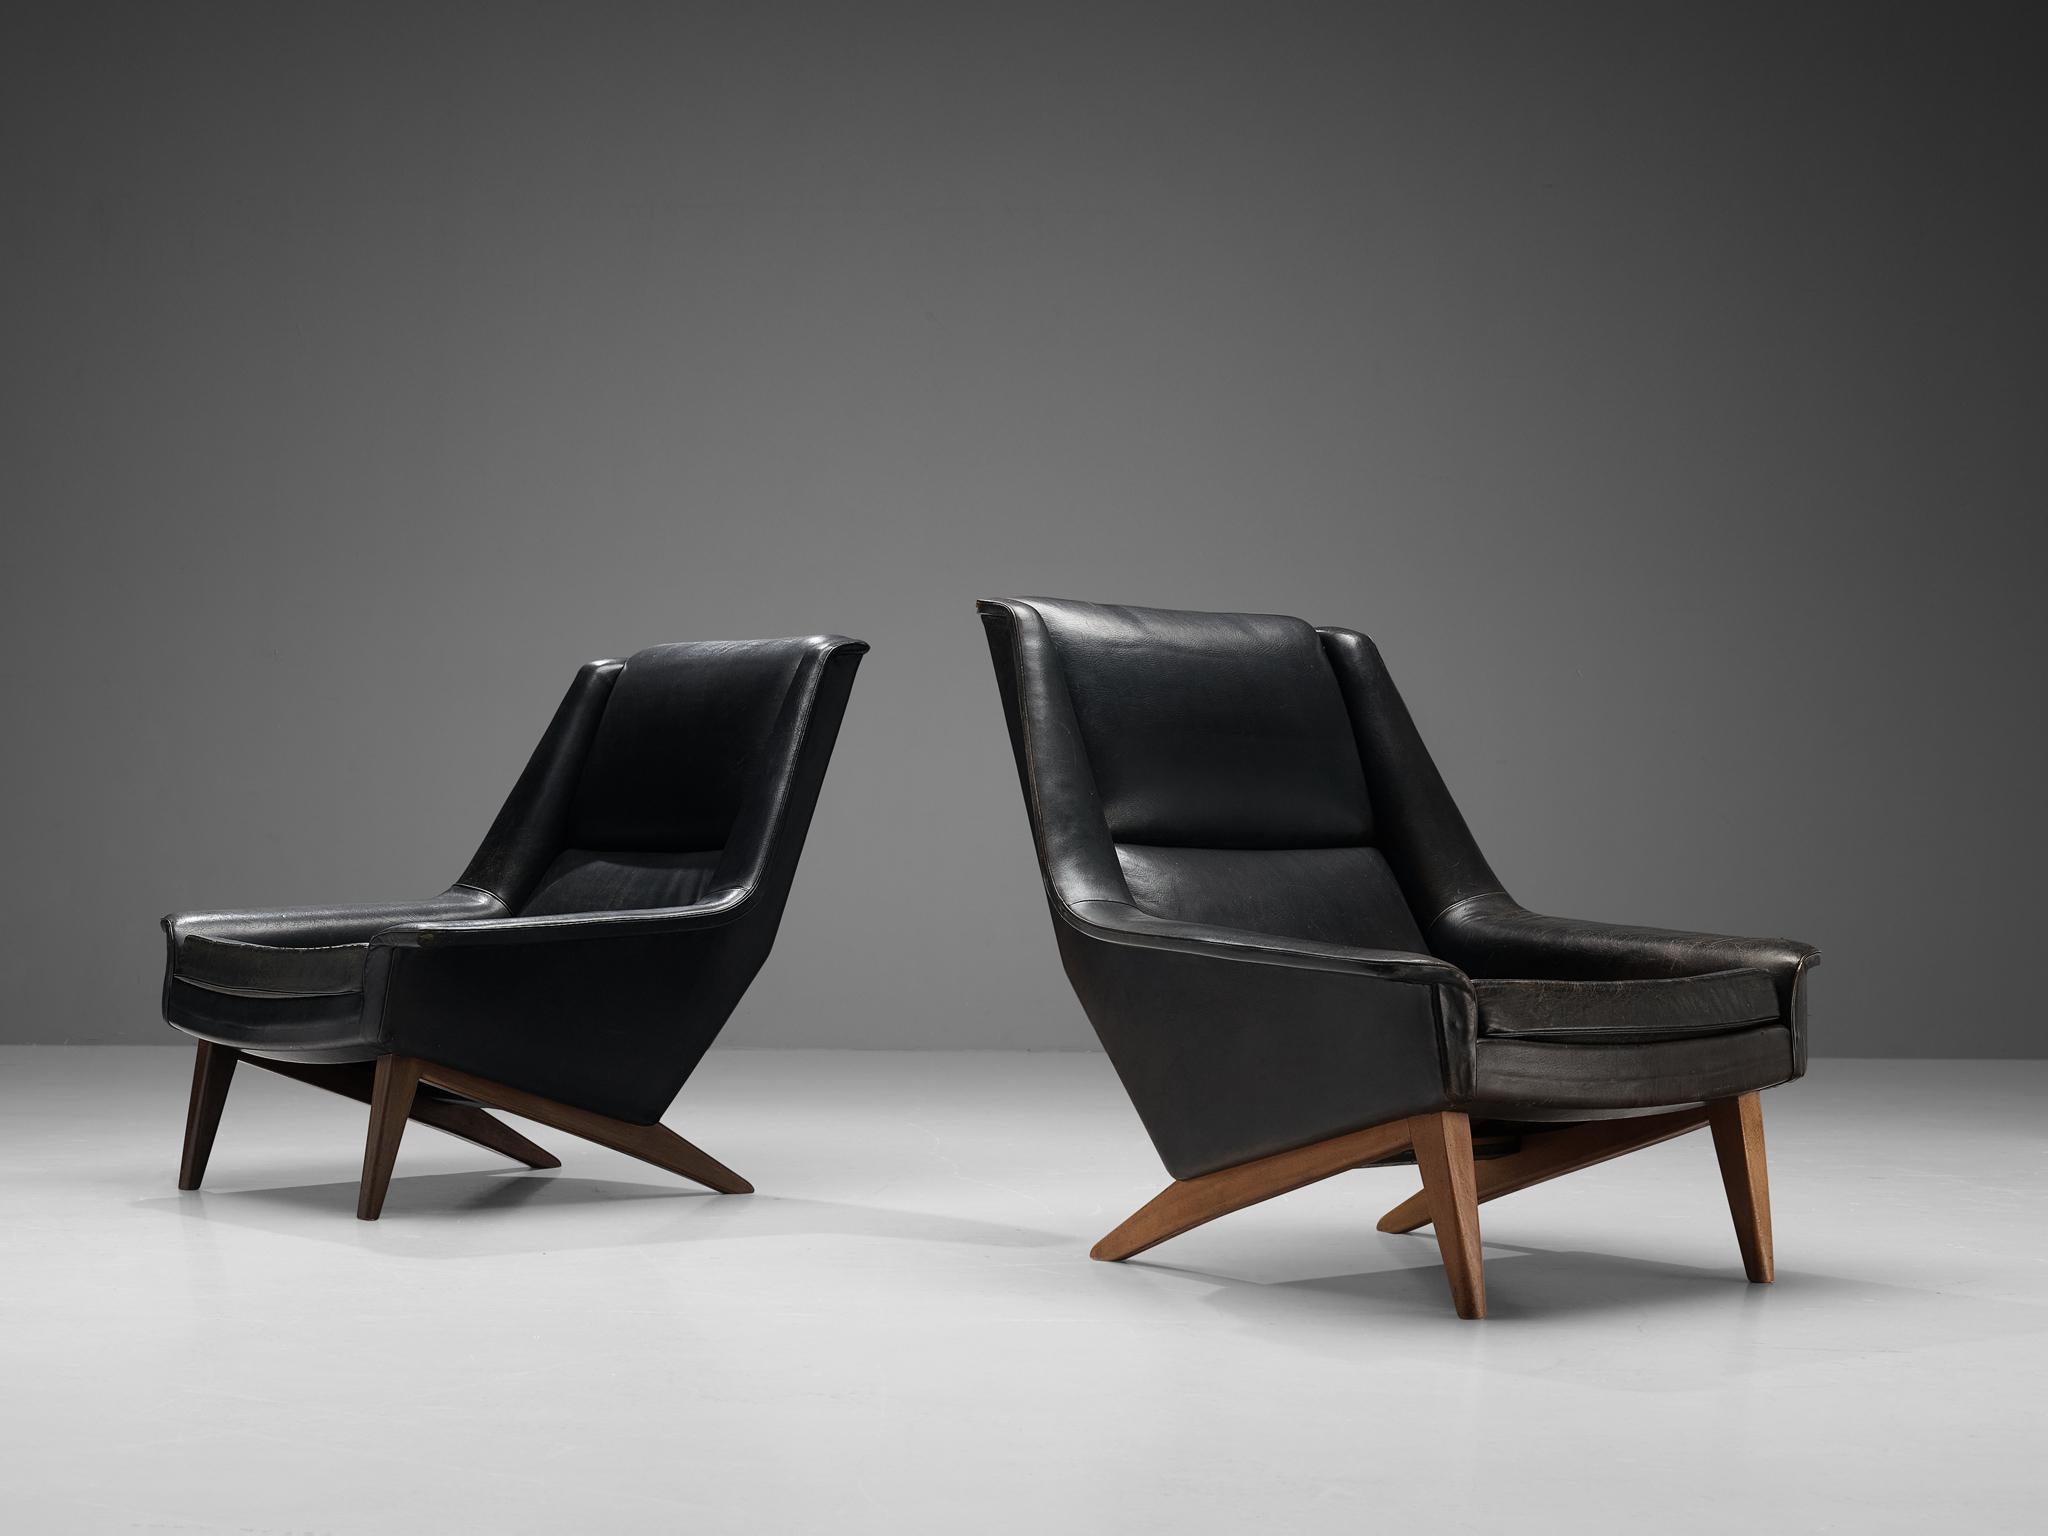 Folke Ohlsson for Fritz Hansen, easy chairs, model '4410', patinated leather, beech, Denmark, designed in 1957

These high quality lounge chairs are characterized by a stylish timeless design based on elegant shapes and clean lines. The slightly